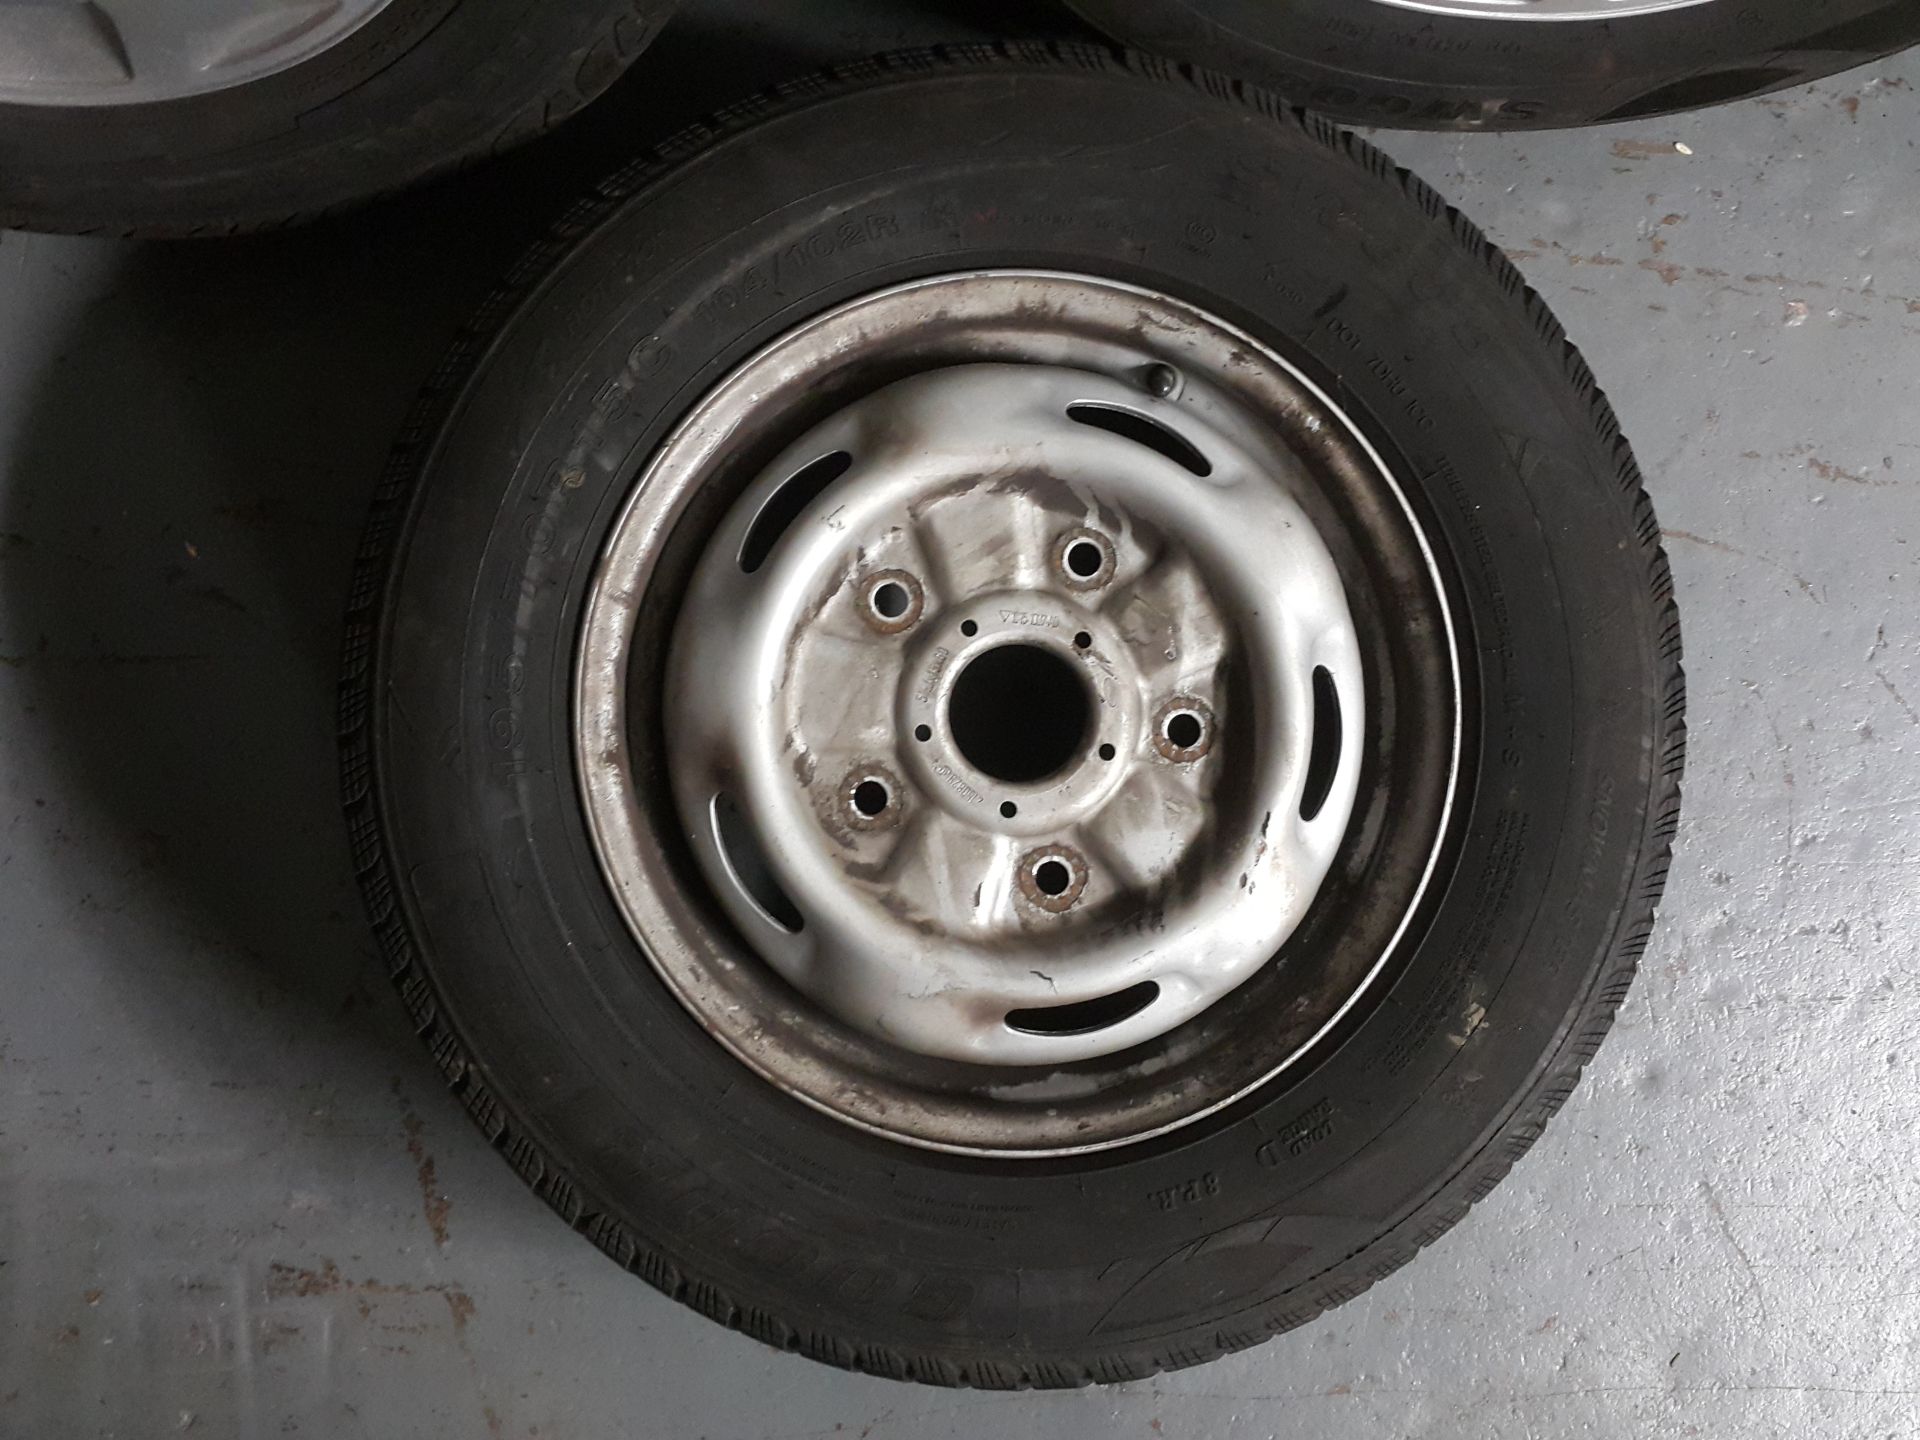 4 X FORD TRANSIT 15" STEEL RIMS WITH TYRES 195/70/R15 (2 UNIROYAL 2 OTHERS) - Bild 8 aus 9